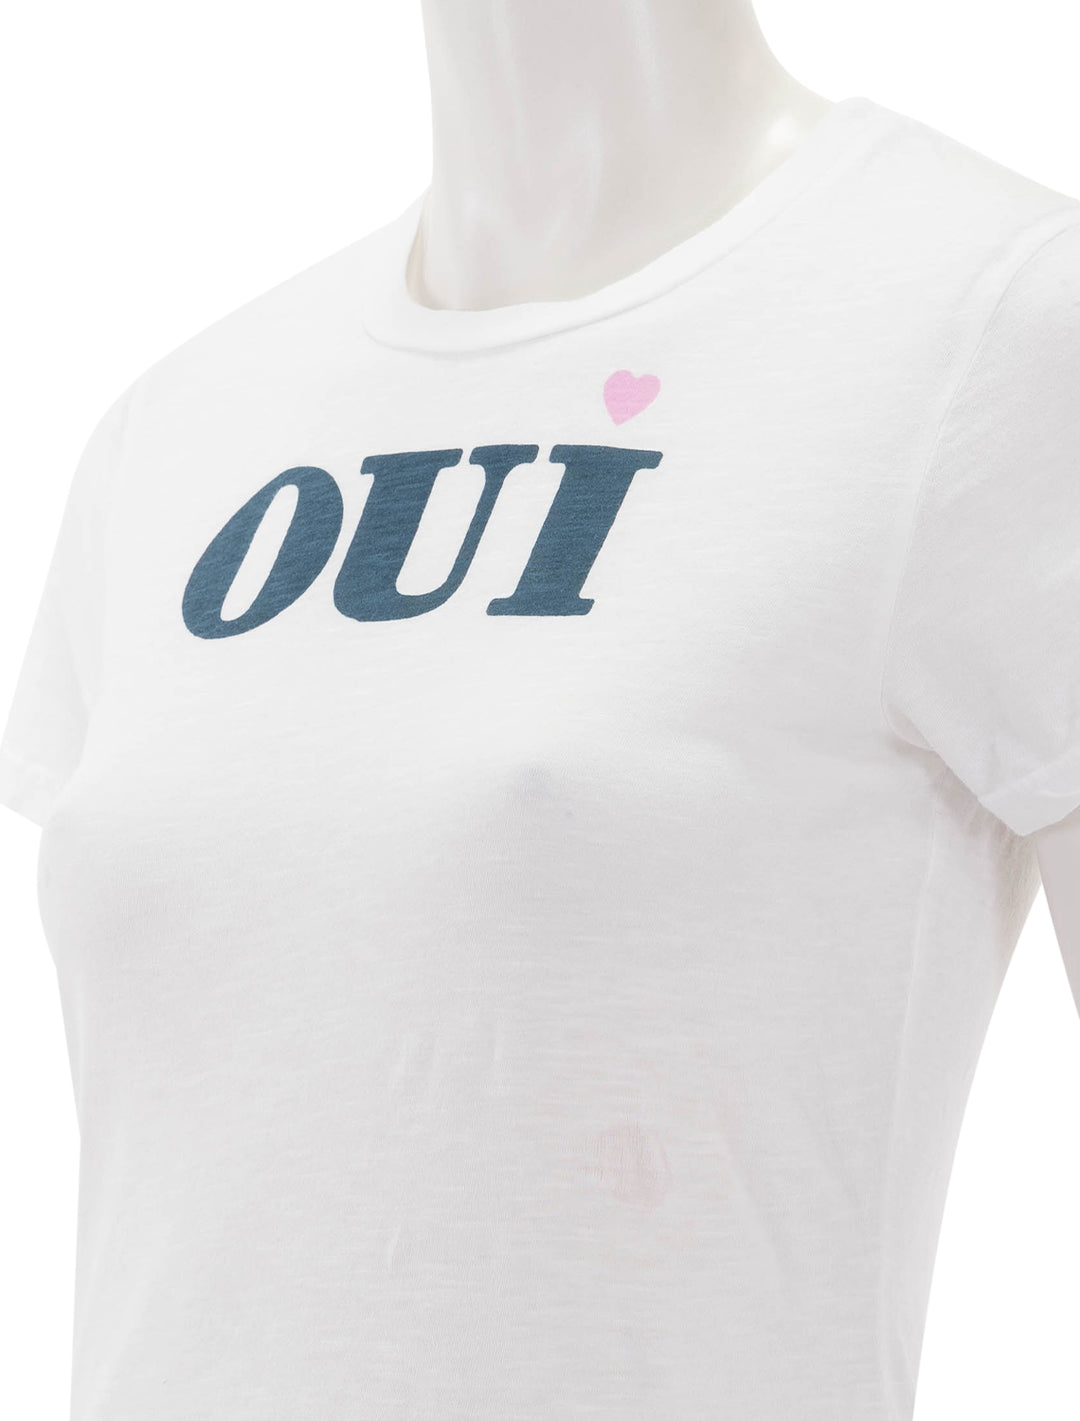 Close-up view of Sundry's oui tee in white.